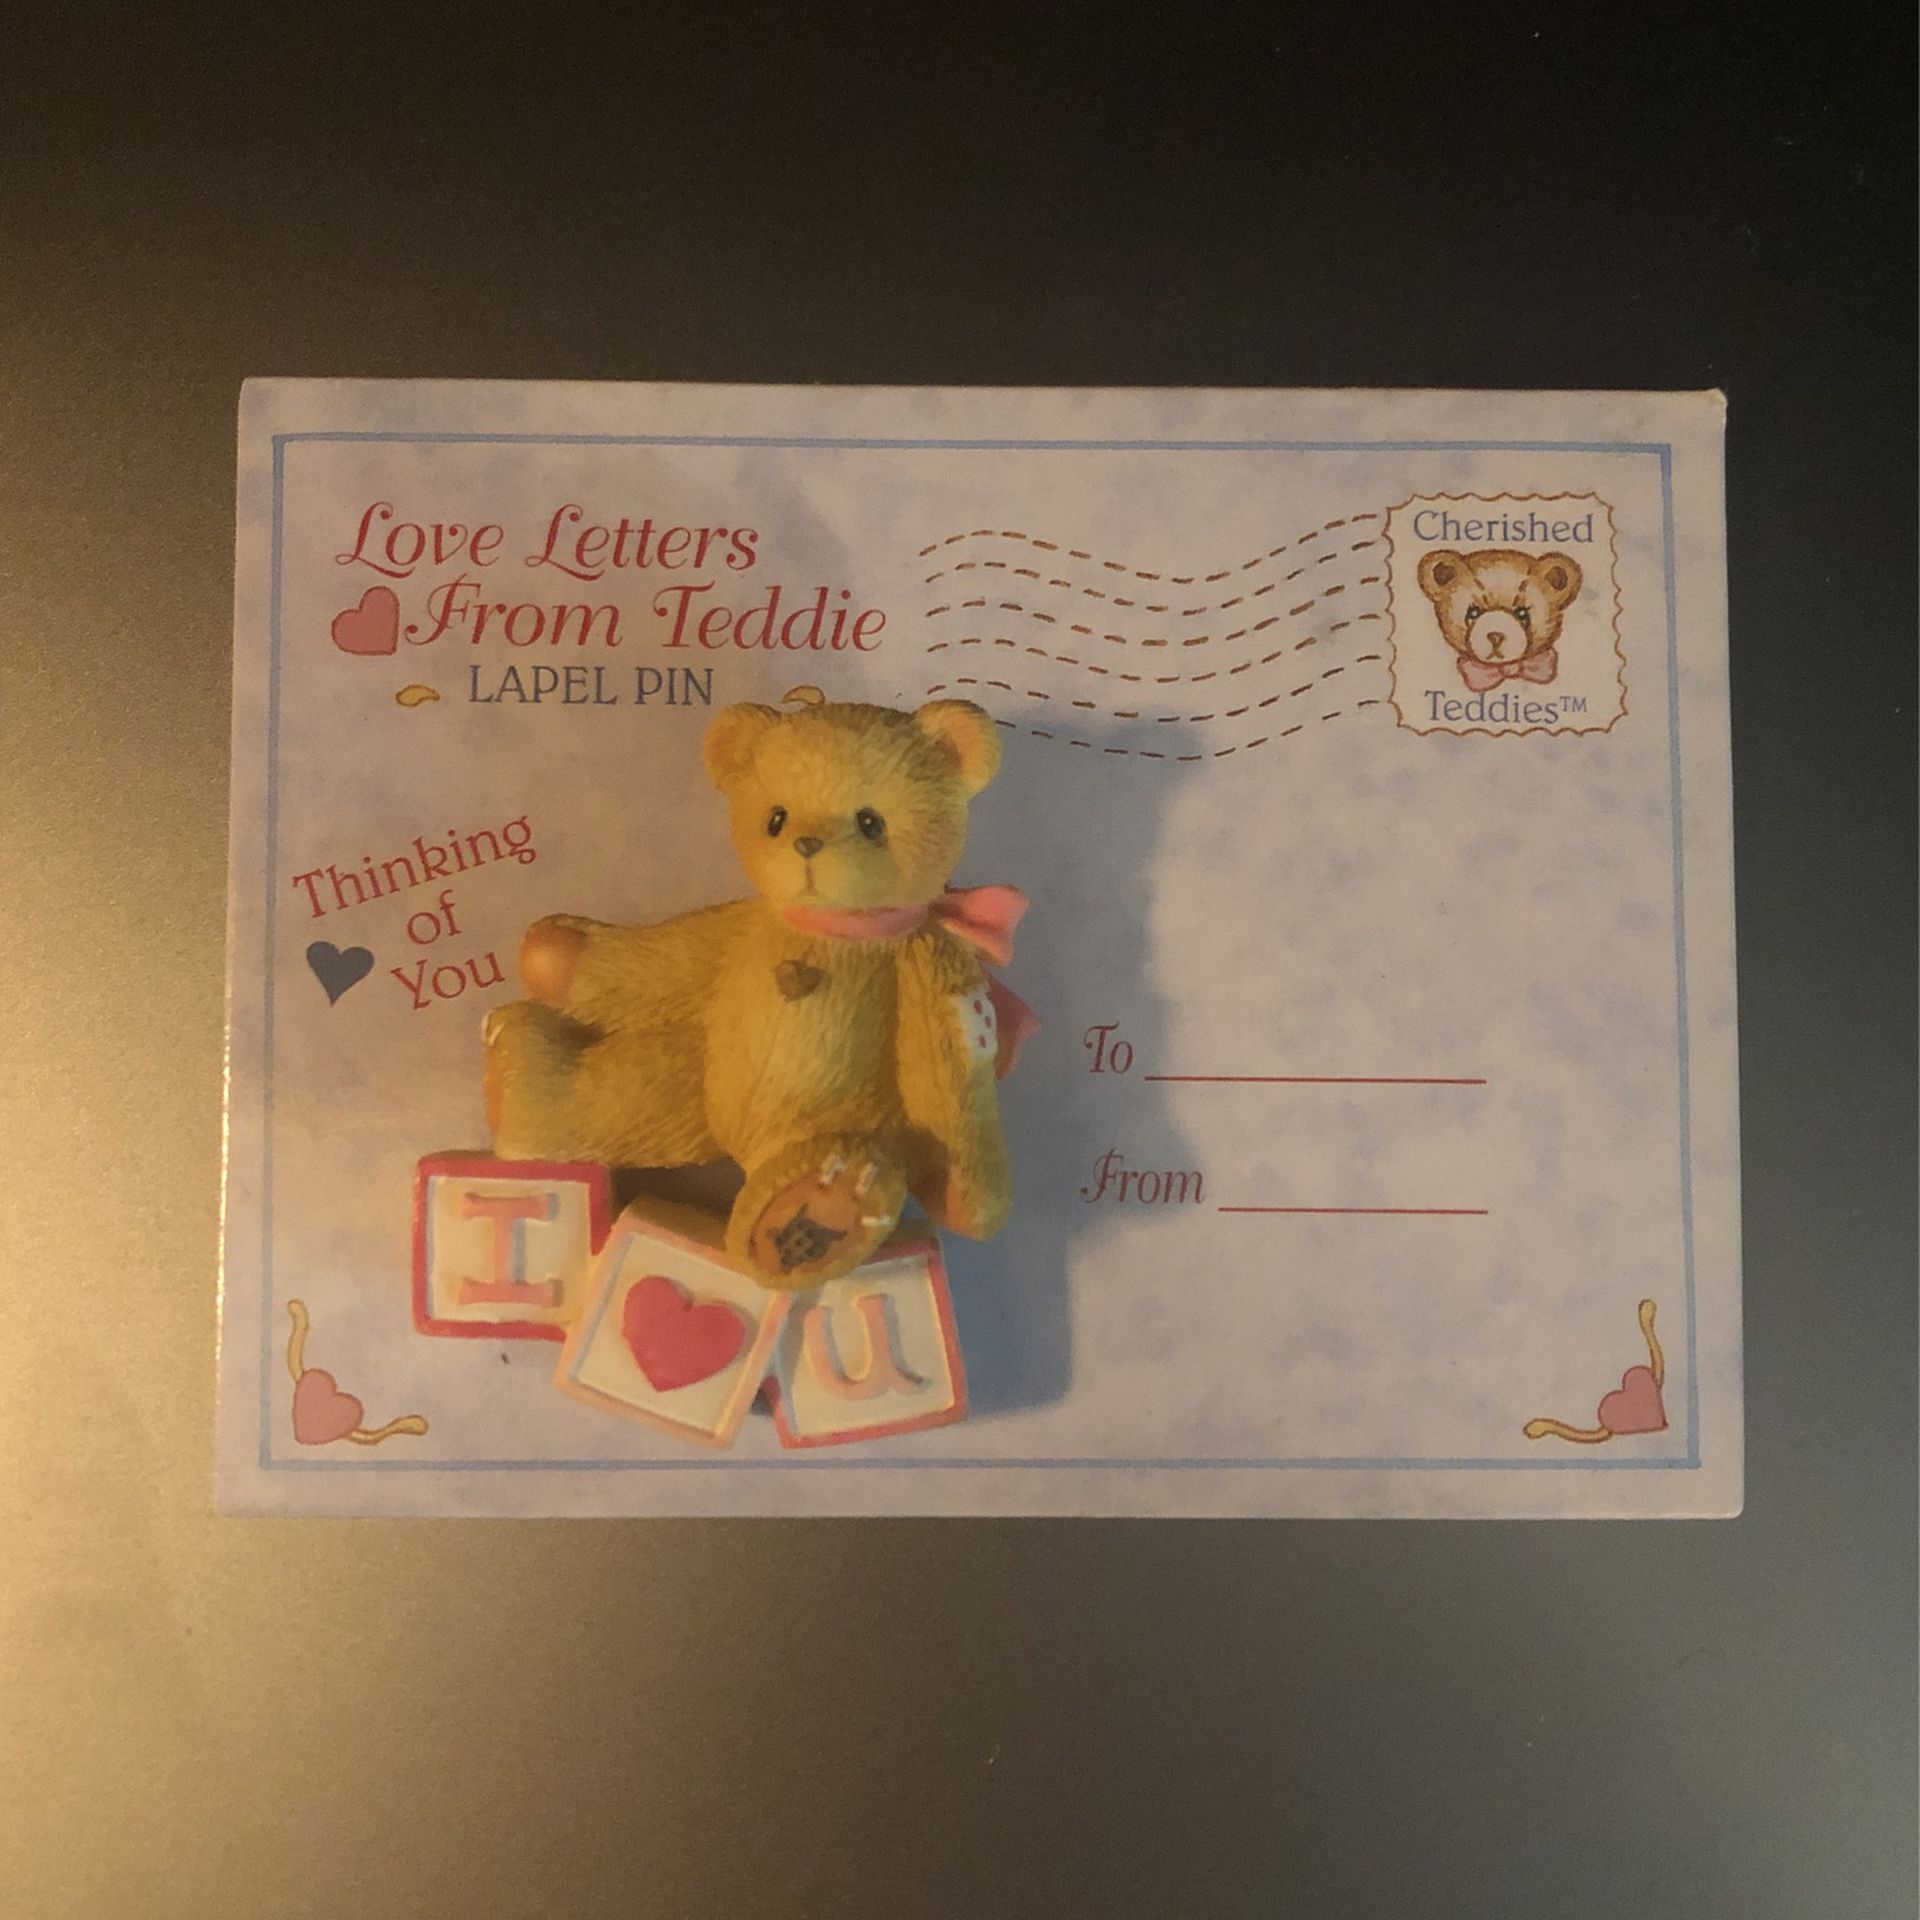 Cherished Teddies “Love Letters from Teddie” Lapel Pin 1996